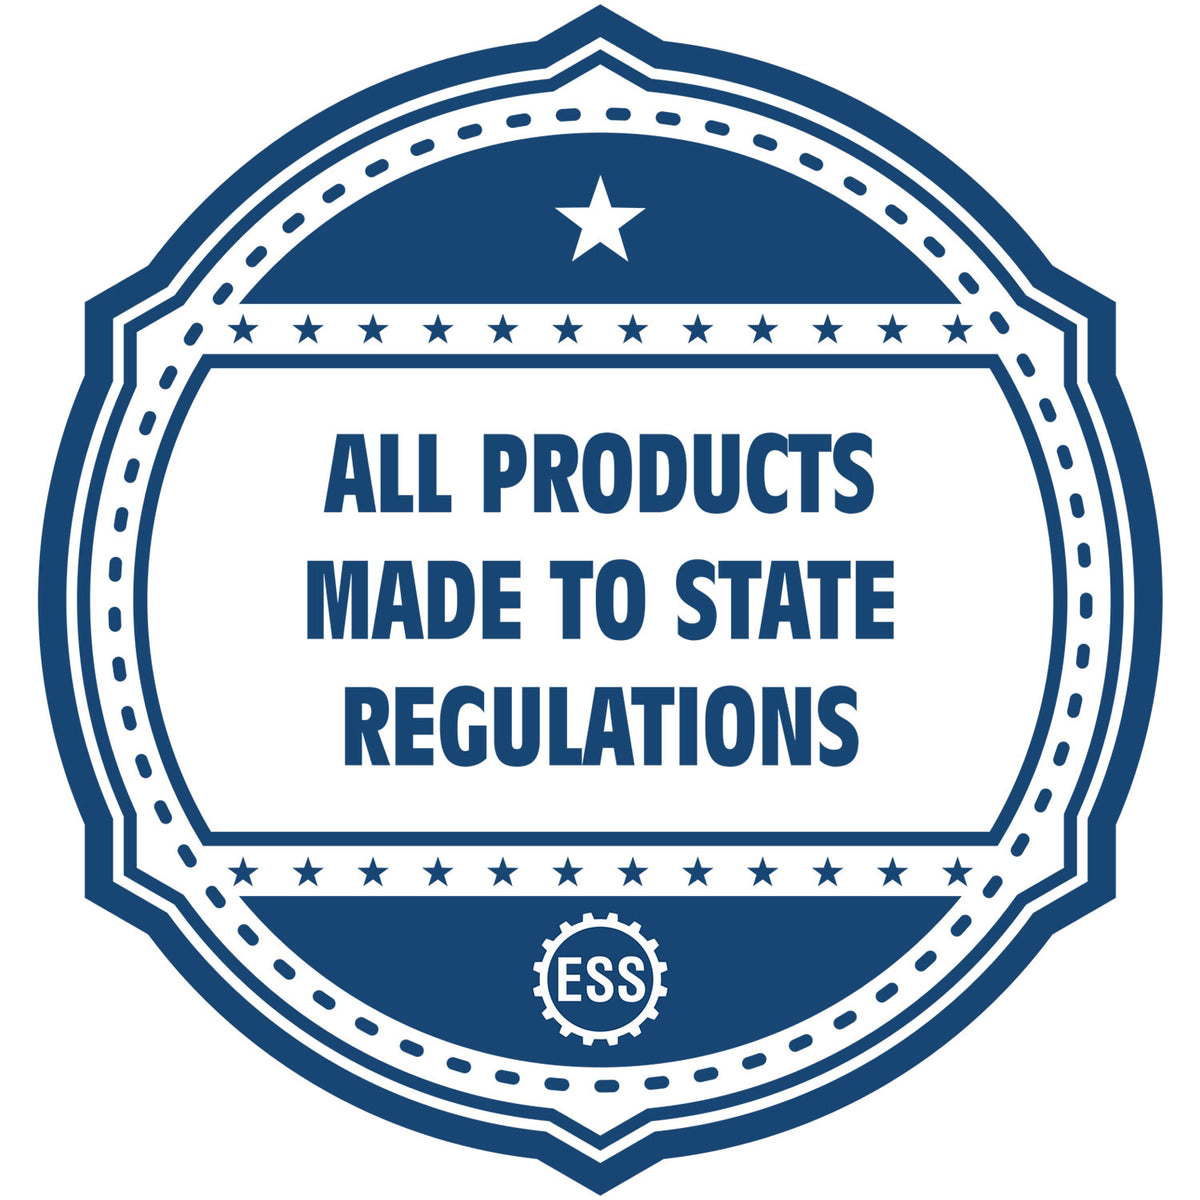 An icon or badge element for the Handheld Montana Professional Engineer Embosser showing that this product is made in compliance with state regulations.